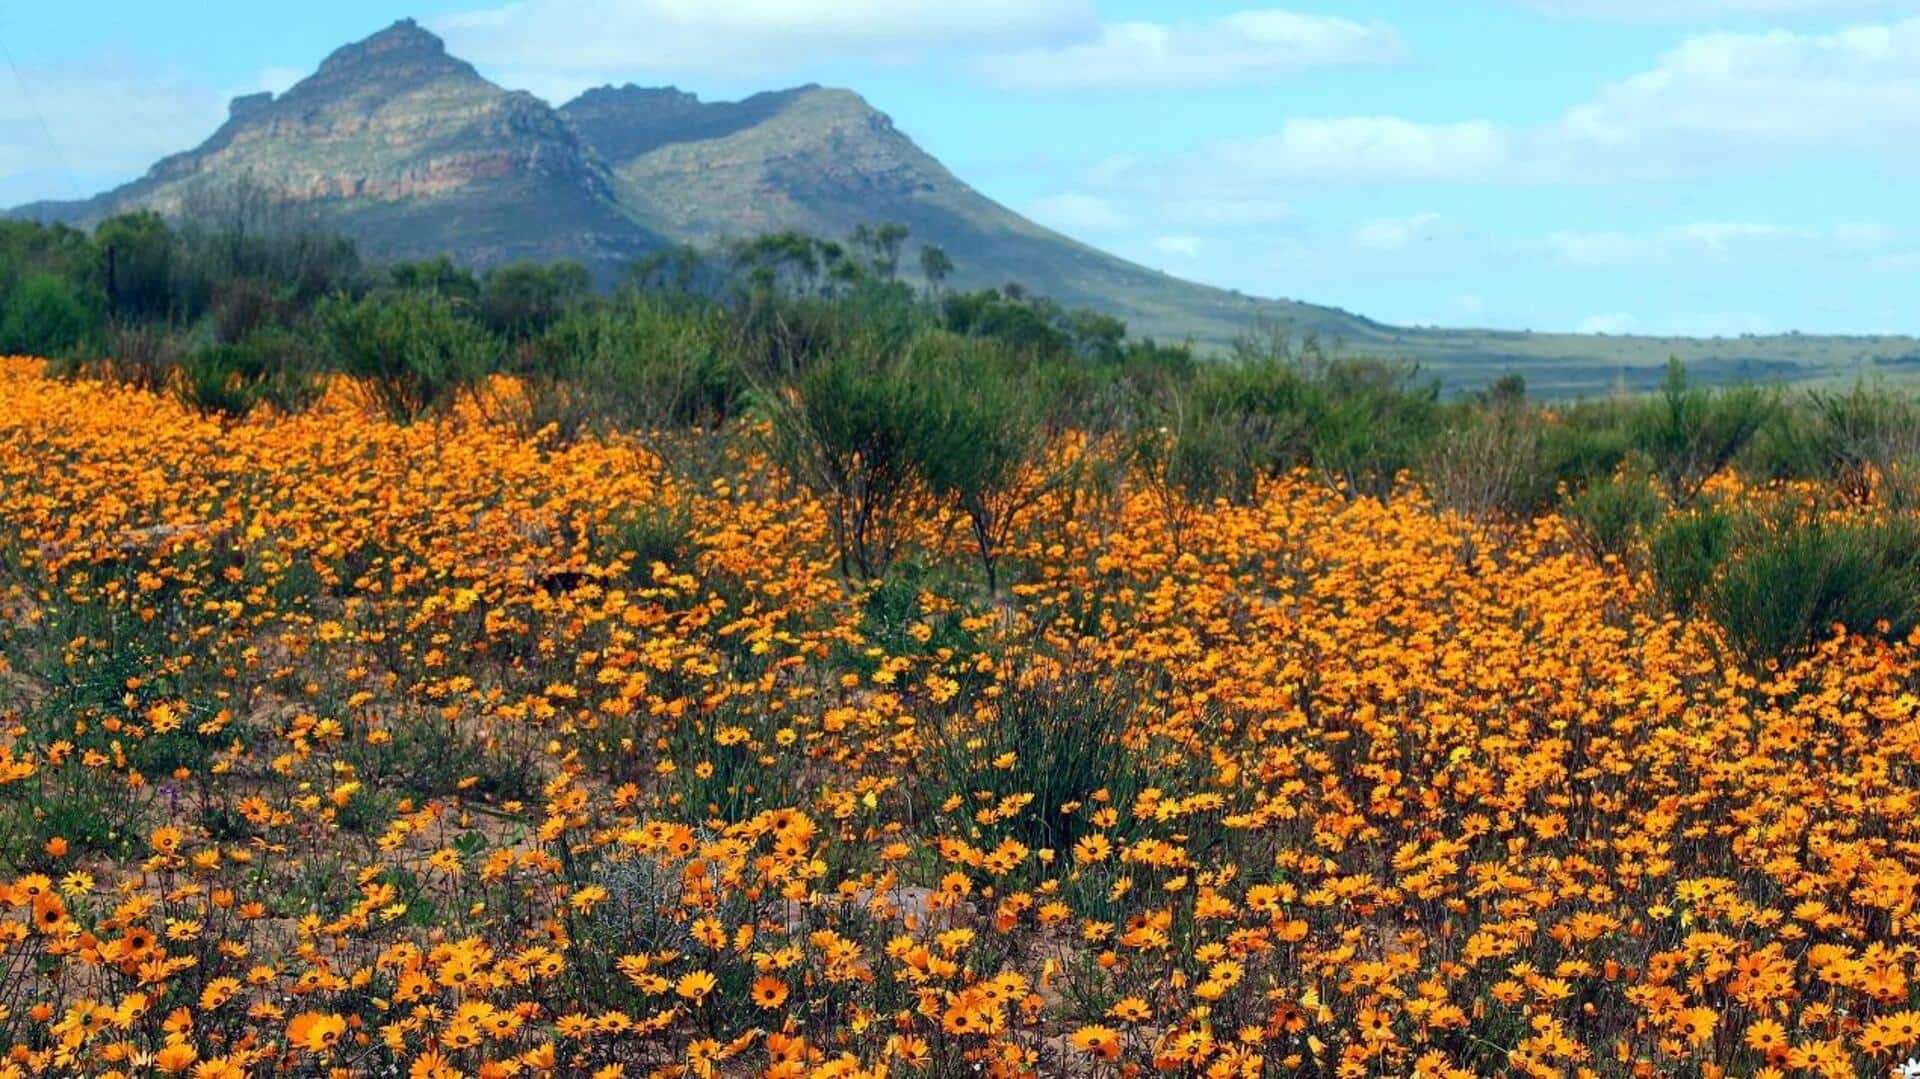 South Africa: Witness Namaqualand's floral spectacle with this guide